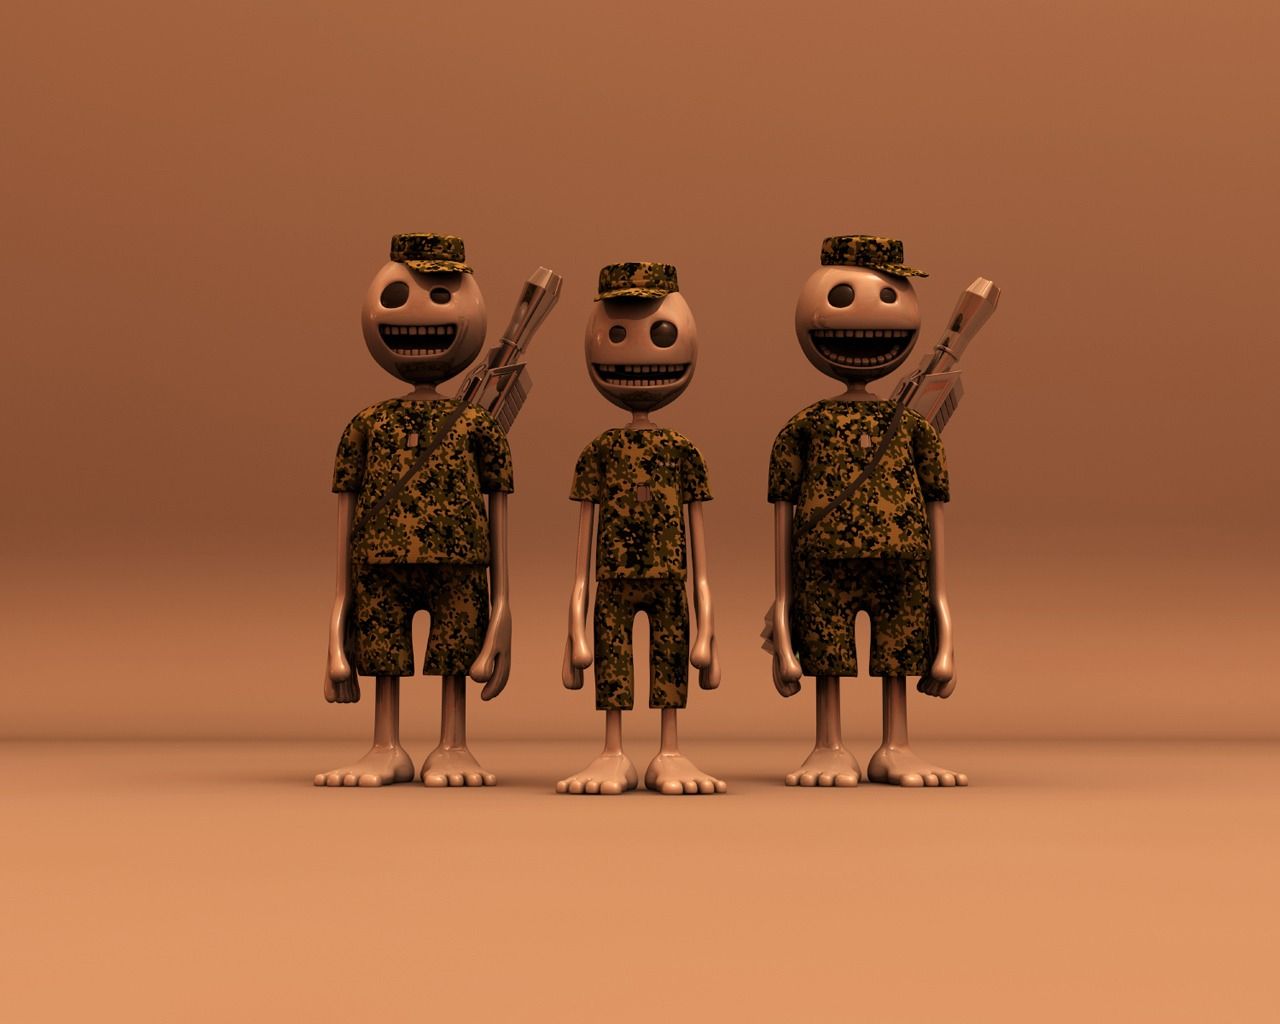 Army Group Wallpaper 3D Characters 3D Wallpaper in jpg format for free download